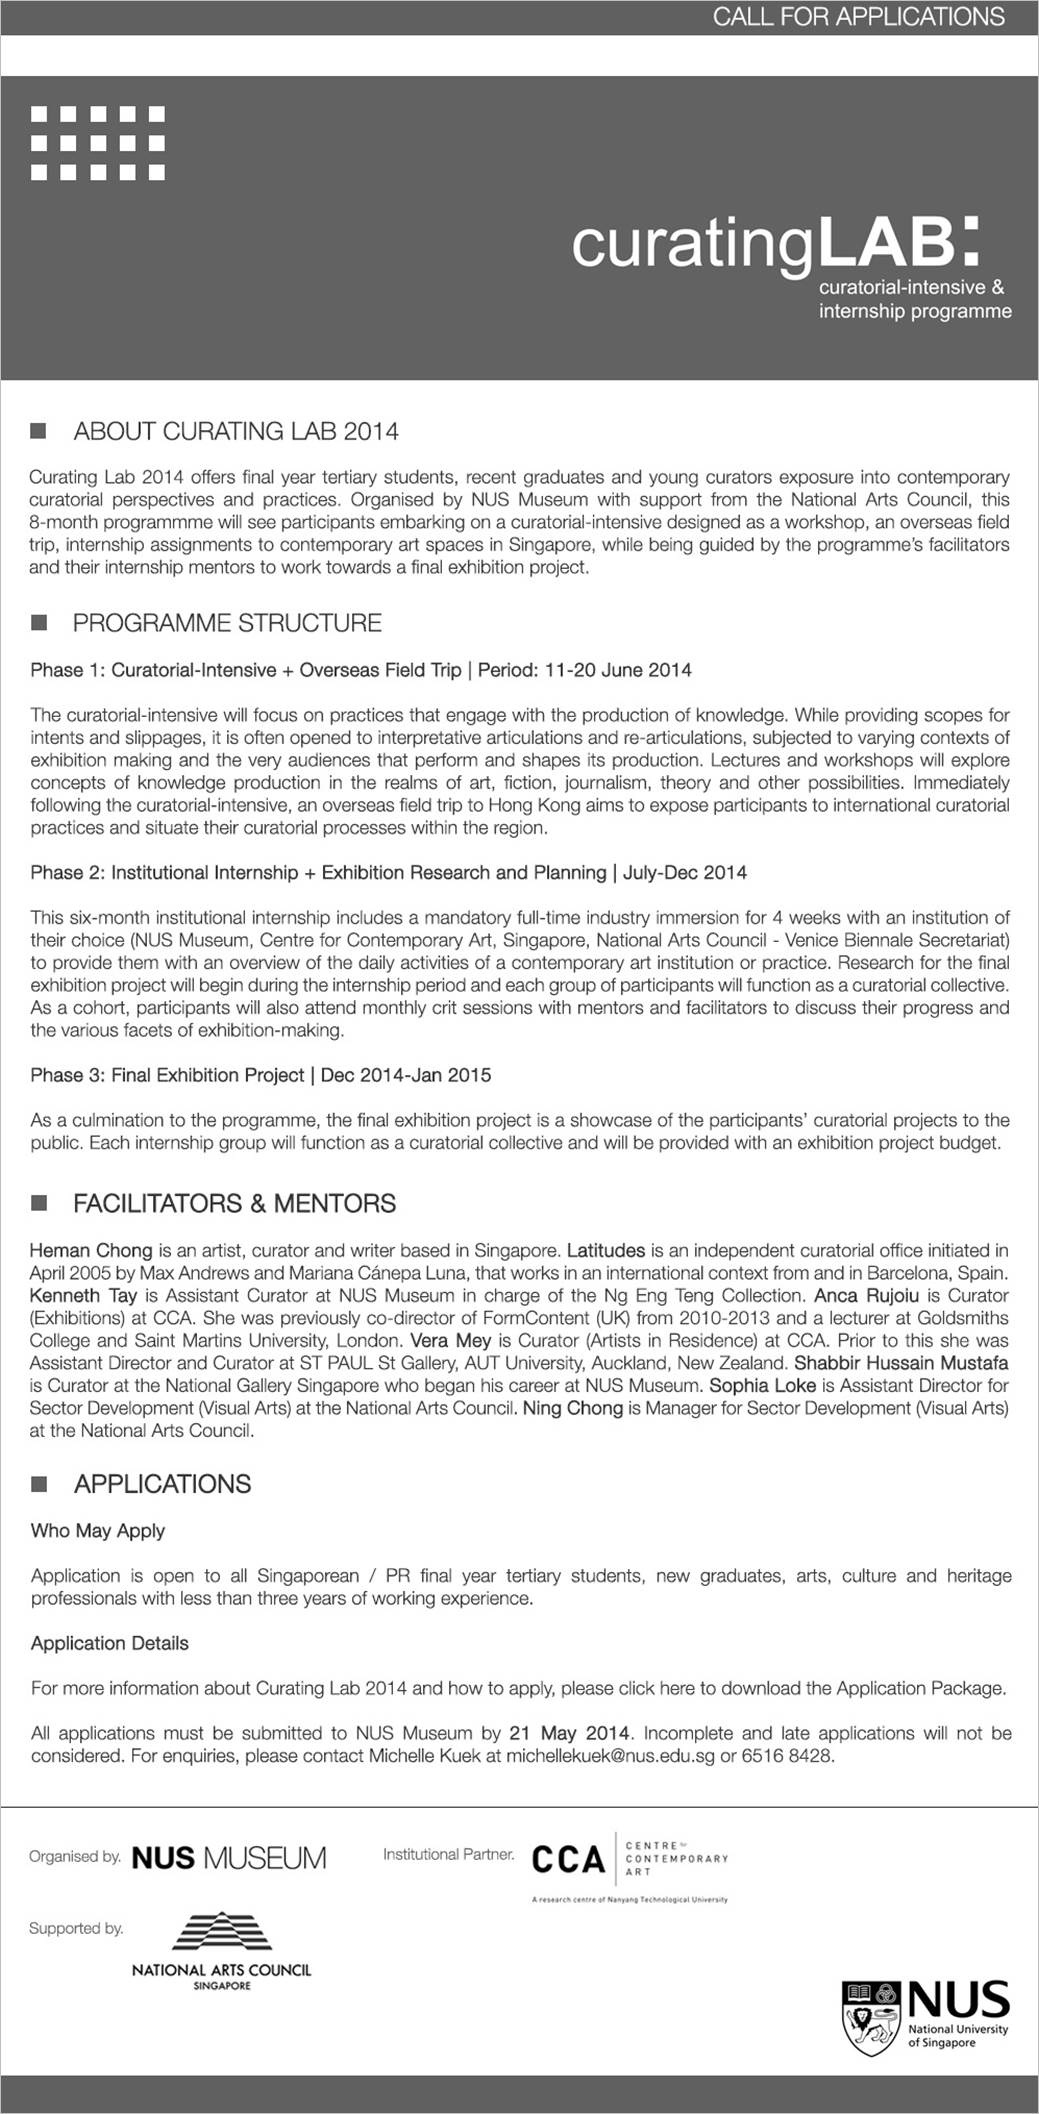 curatorial-intensive and internship programme